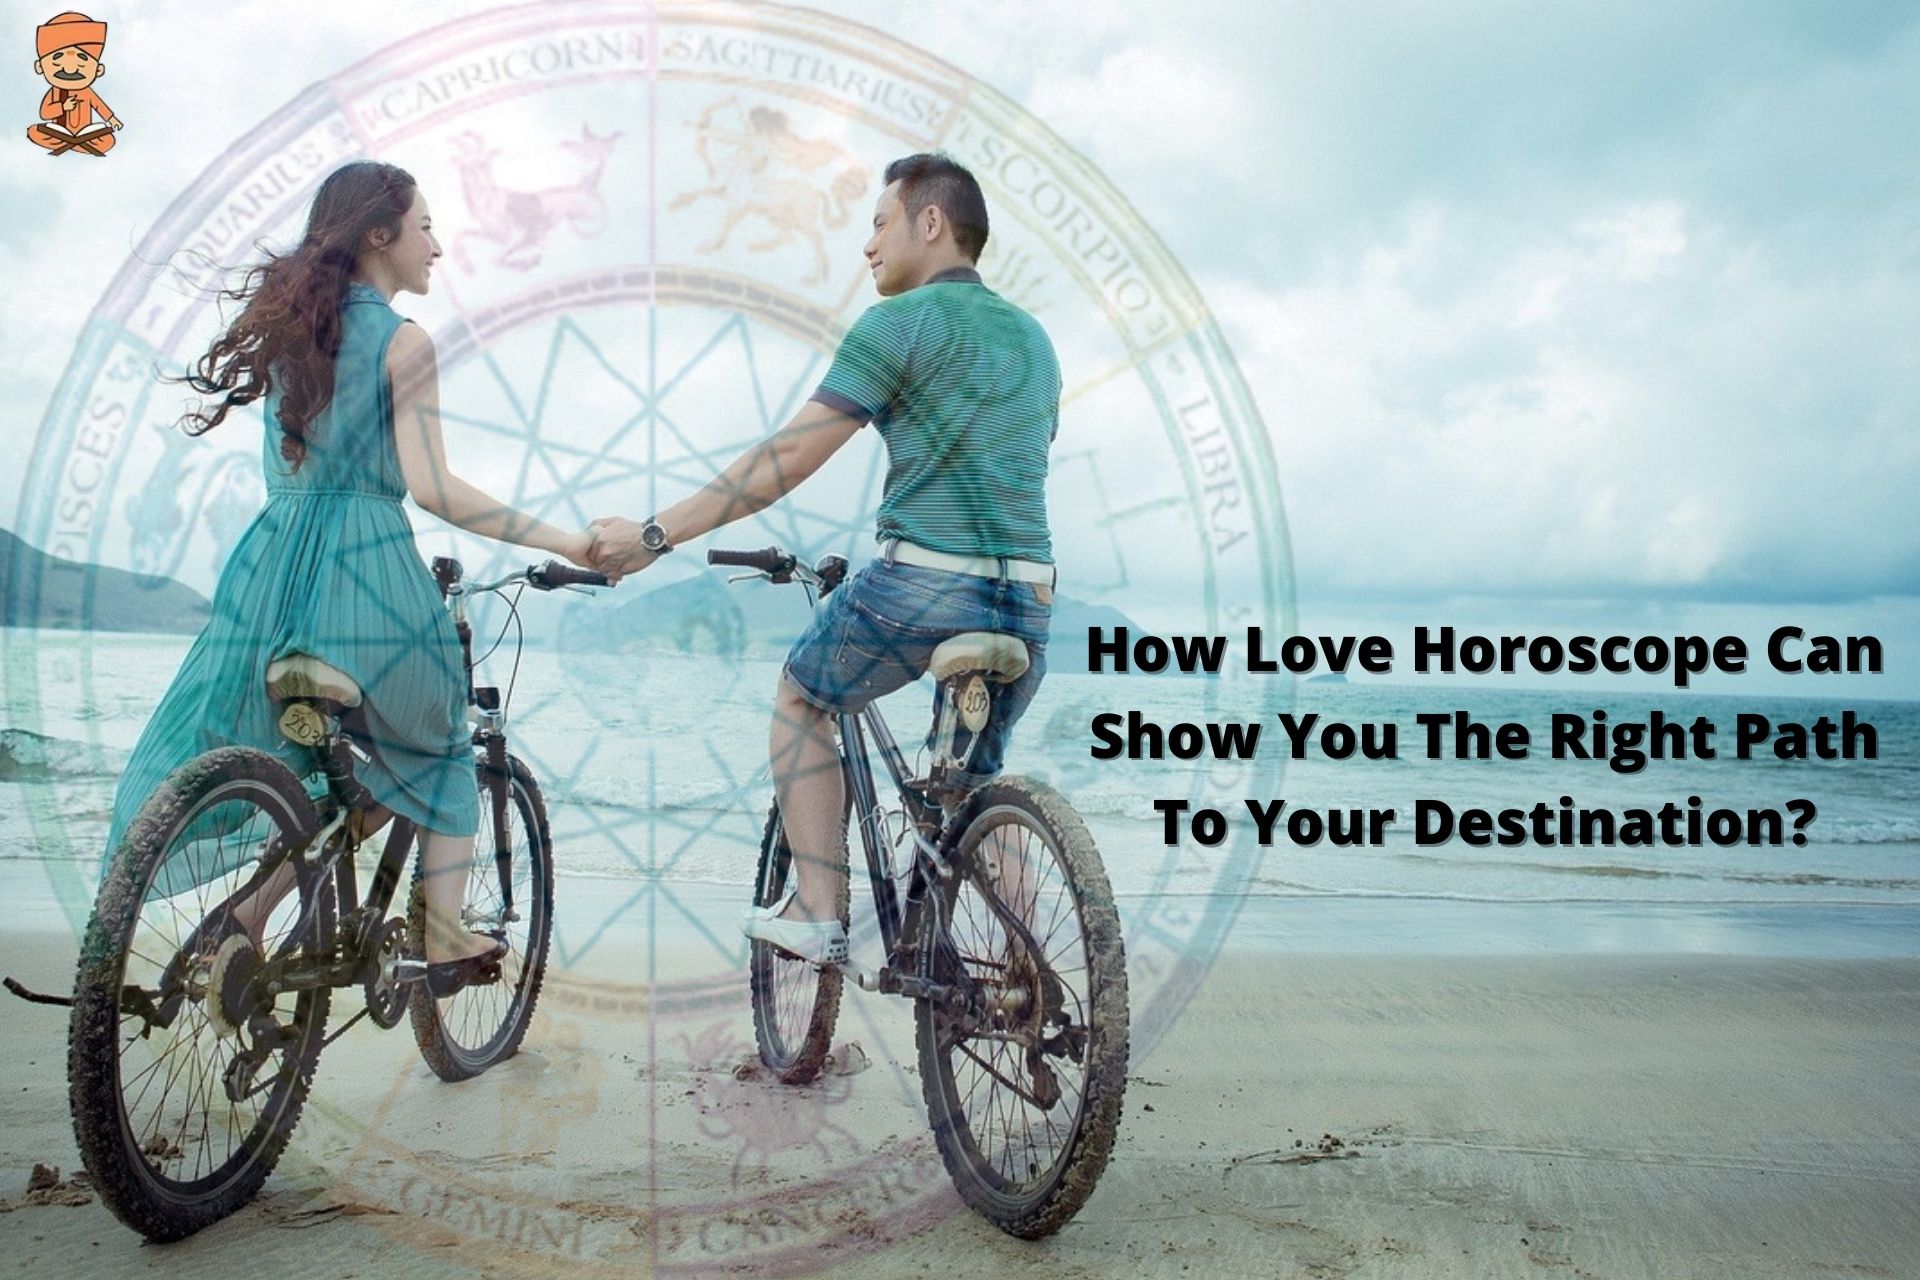 How Love Horoscope Can Show You The Right Path To Your Destination?